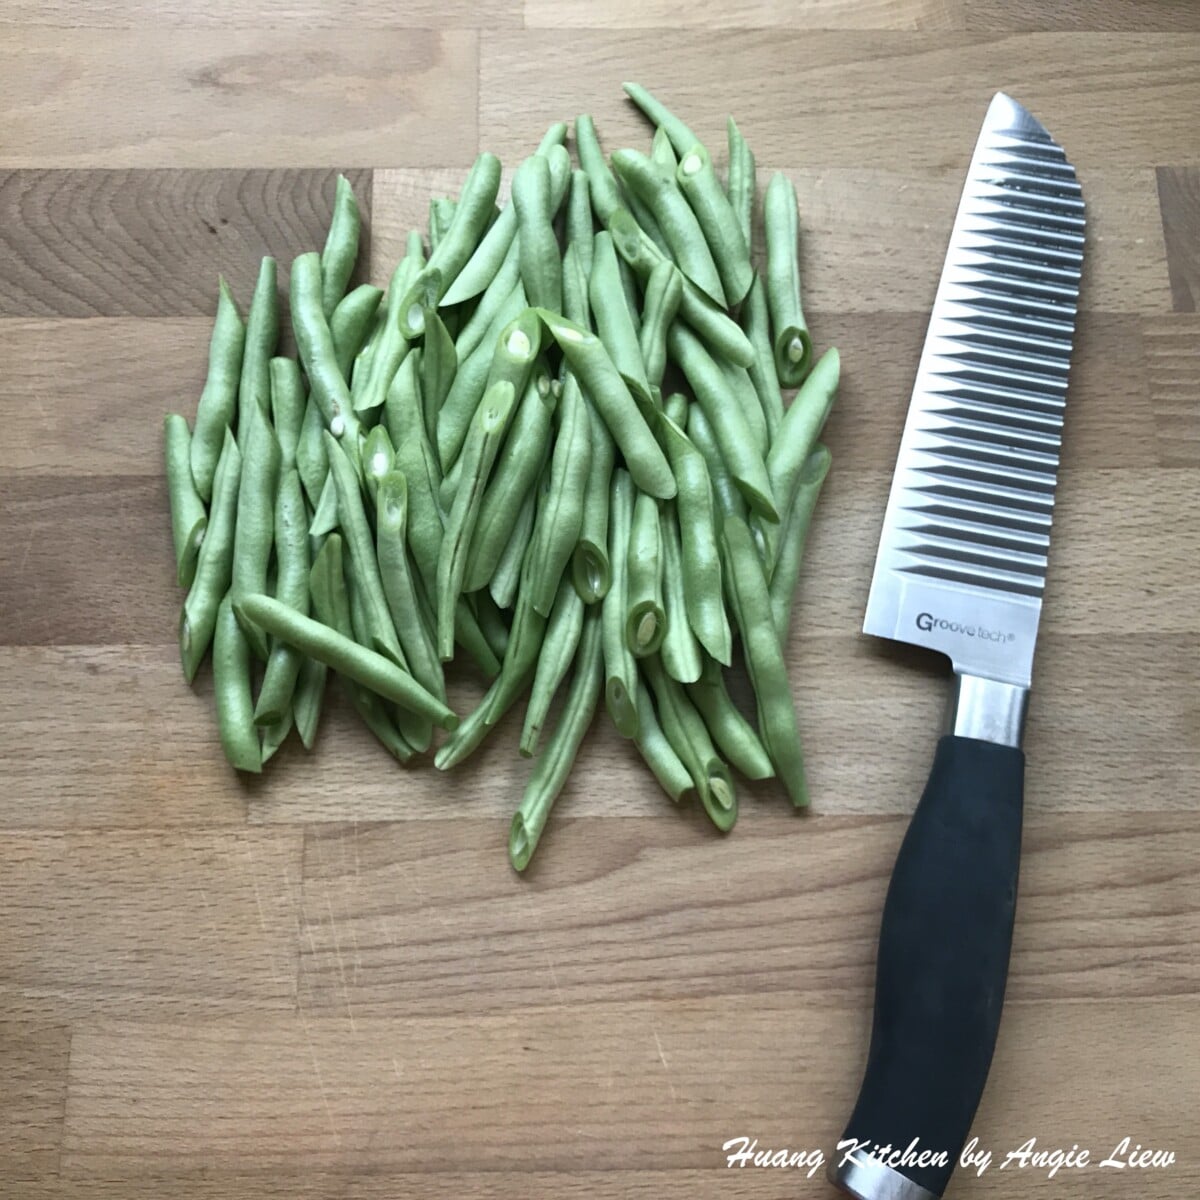 Cut french beans into 5cm length.